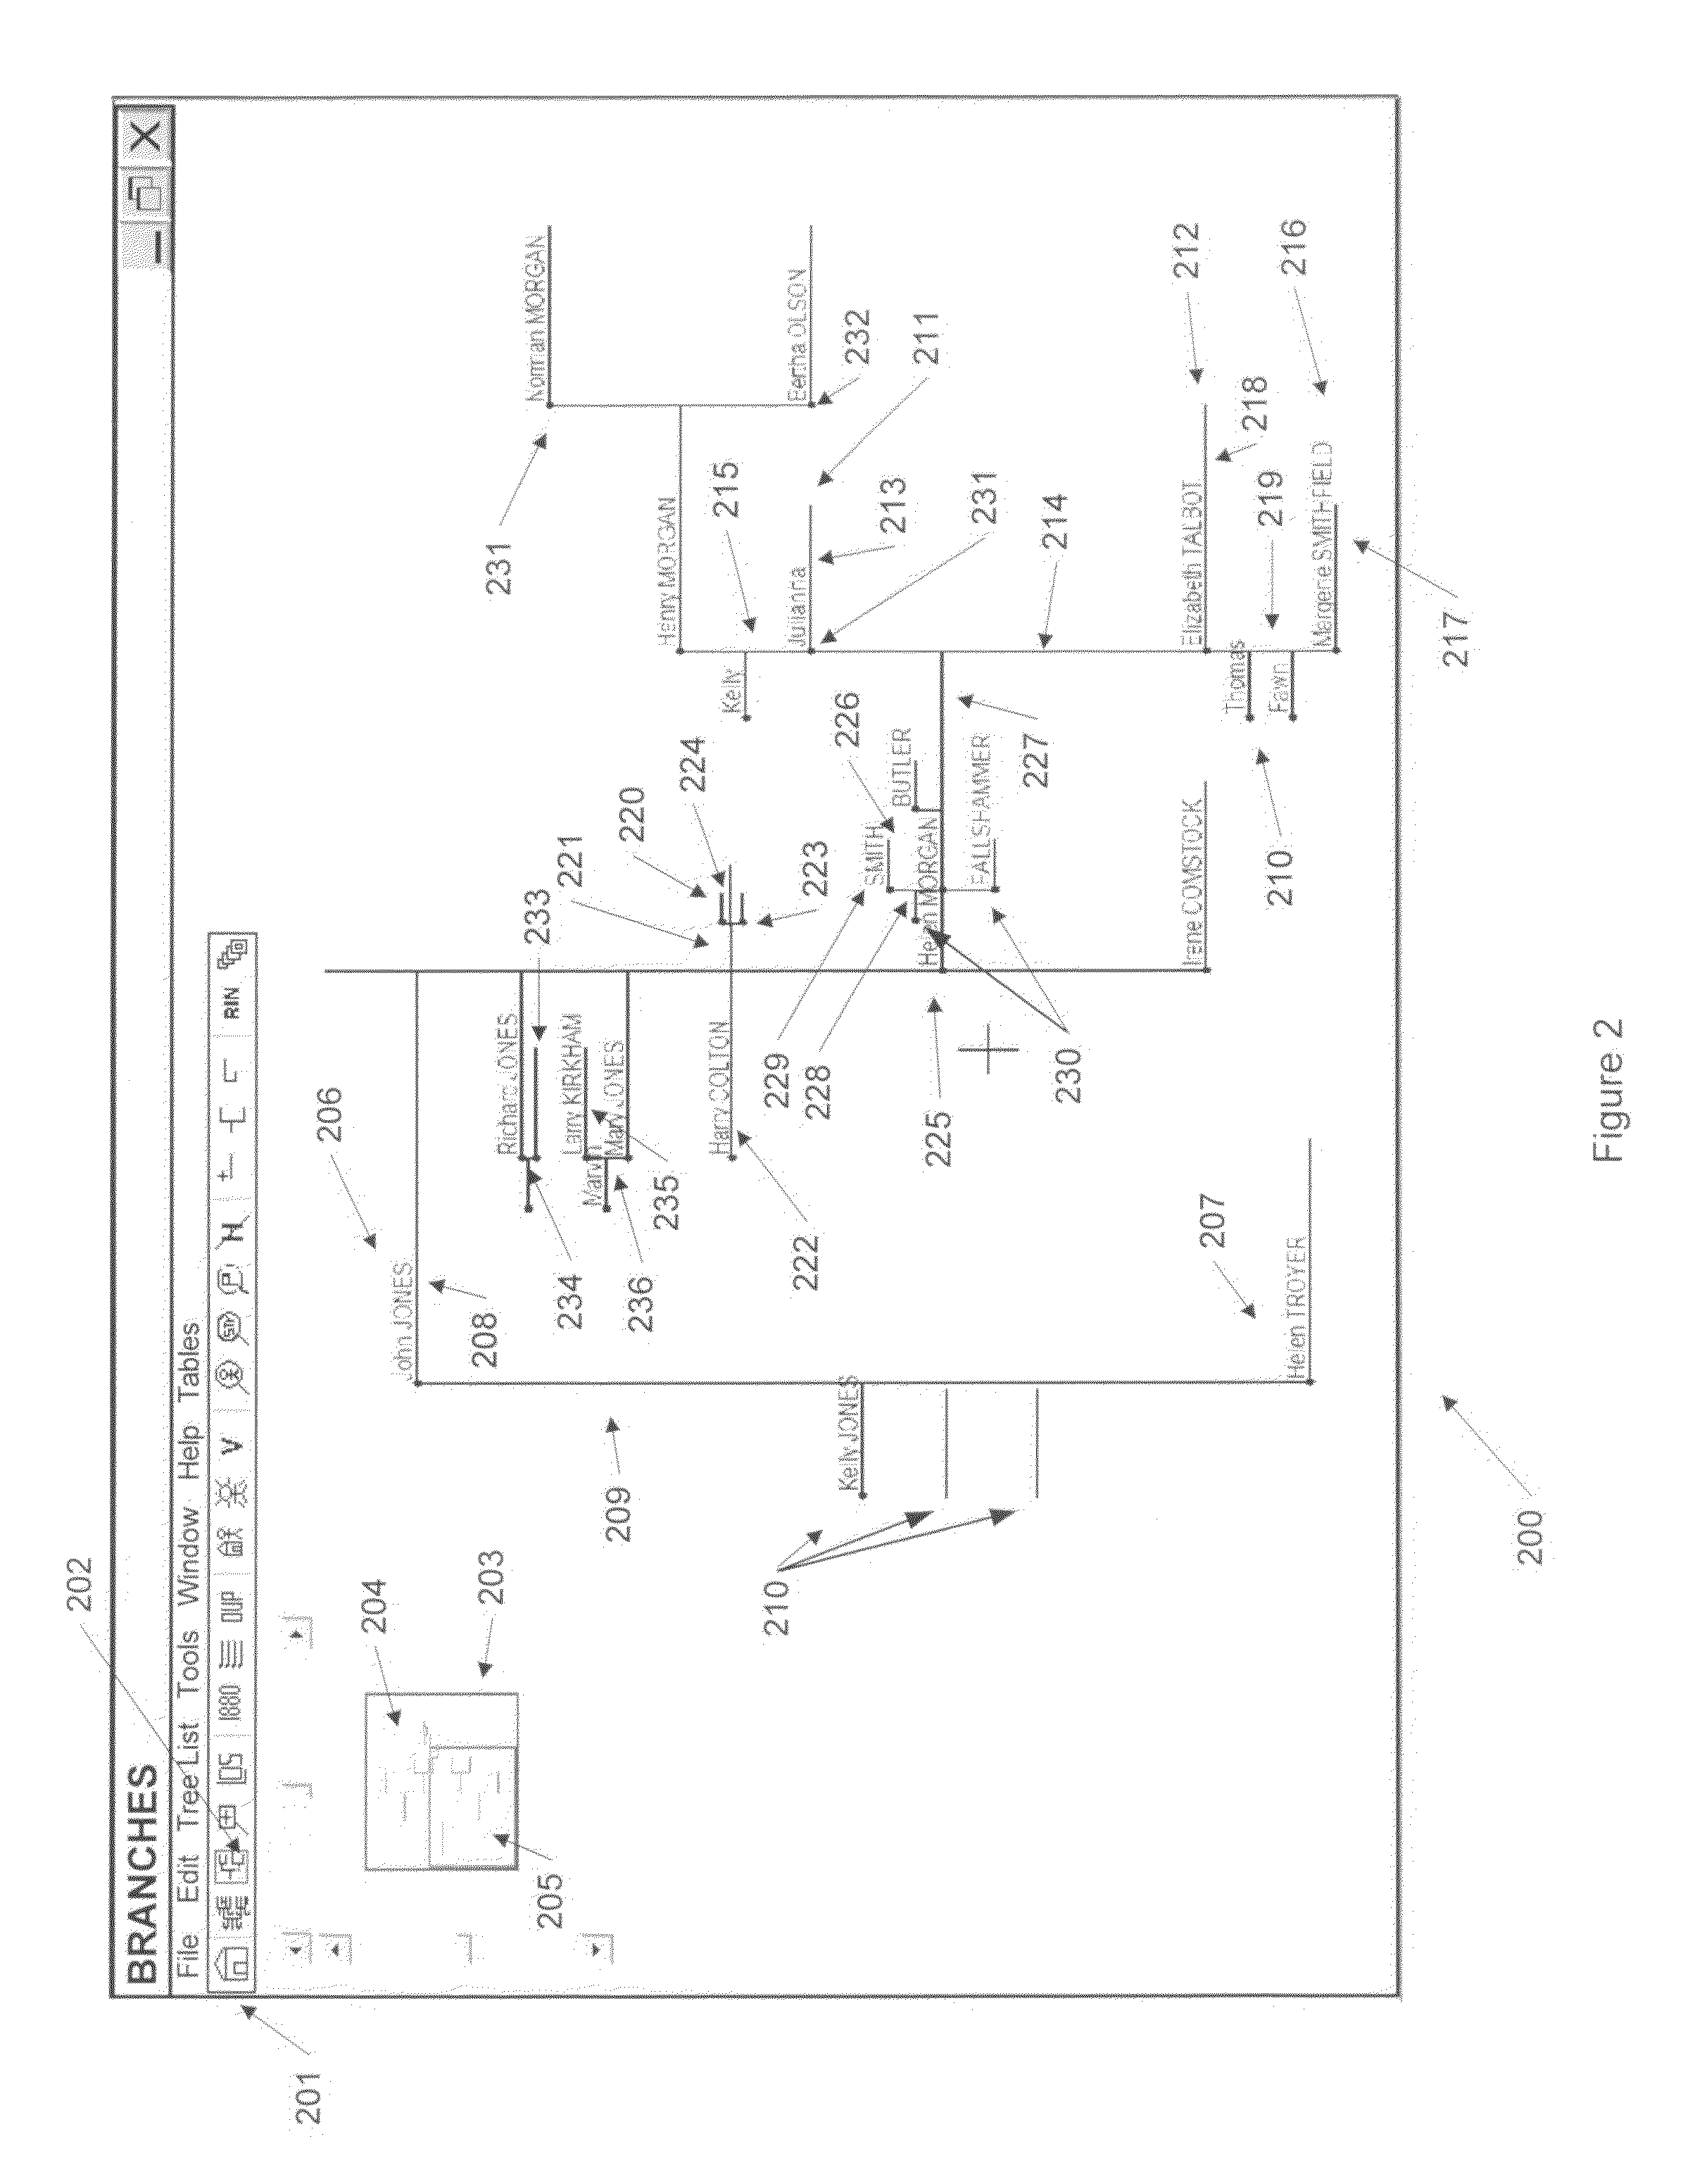 System and method for displaying and manipulating hierarchically linked data in a genealogy database using a graphical interface